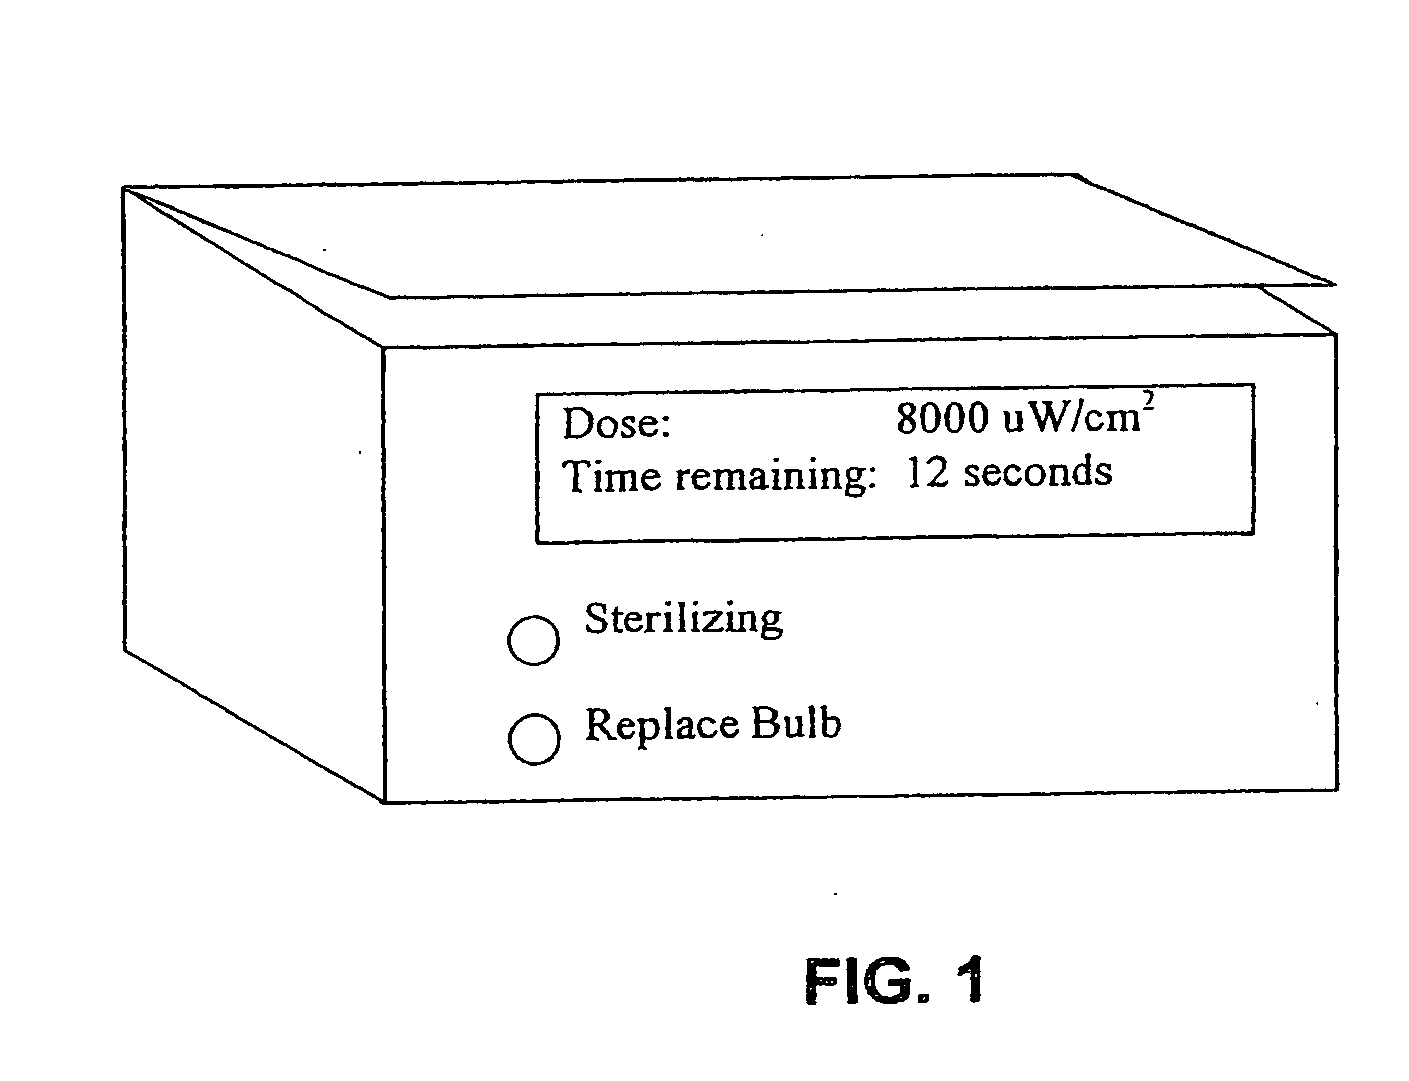 Methods and apparatus for ultraviolet sterilization